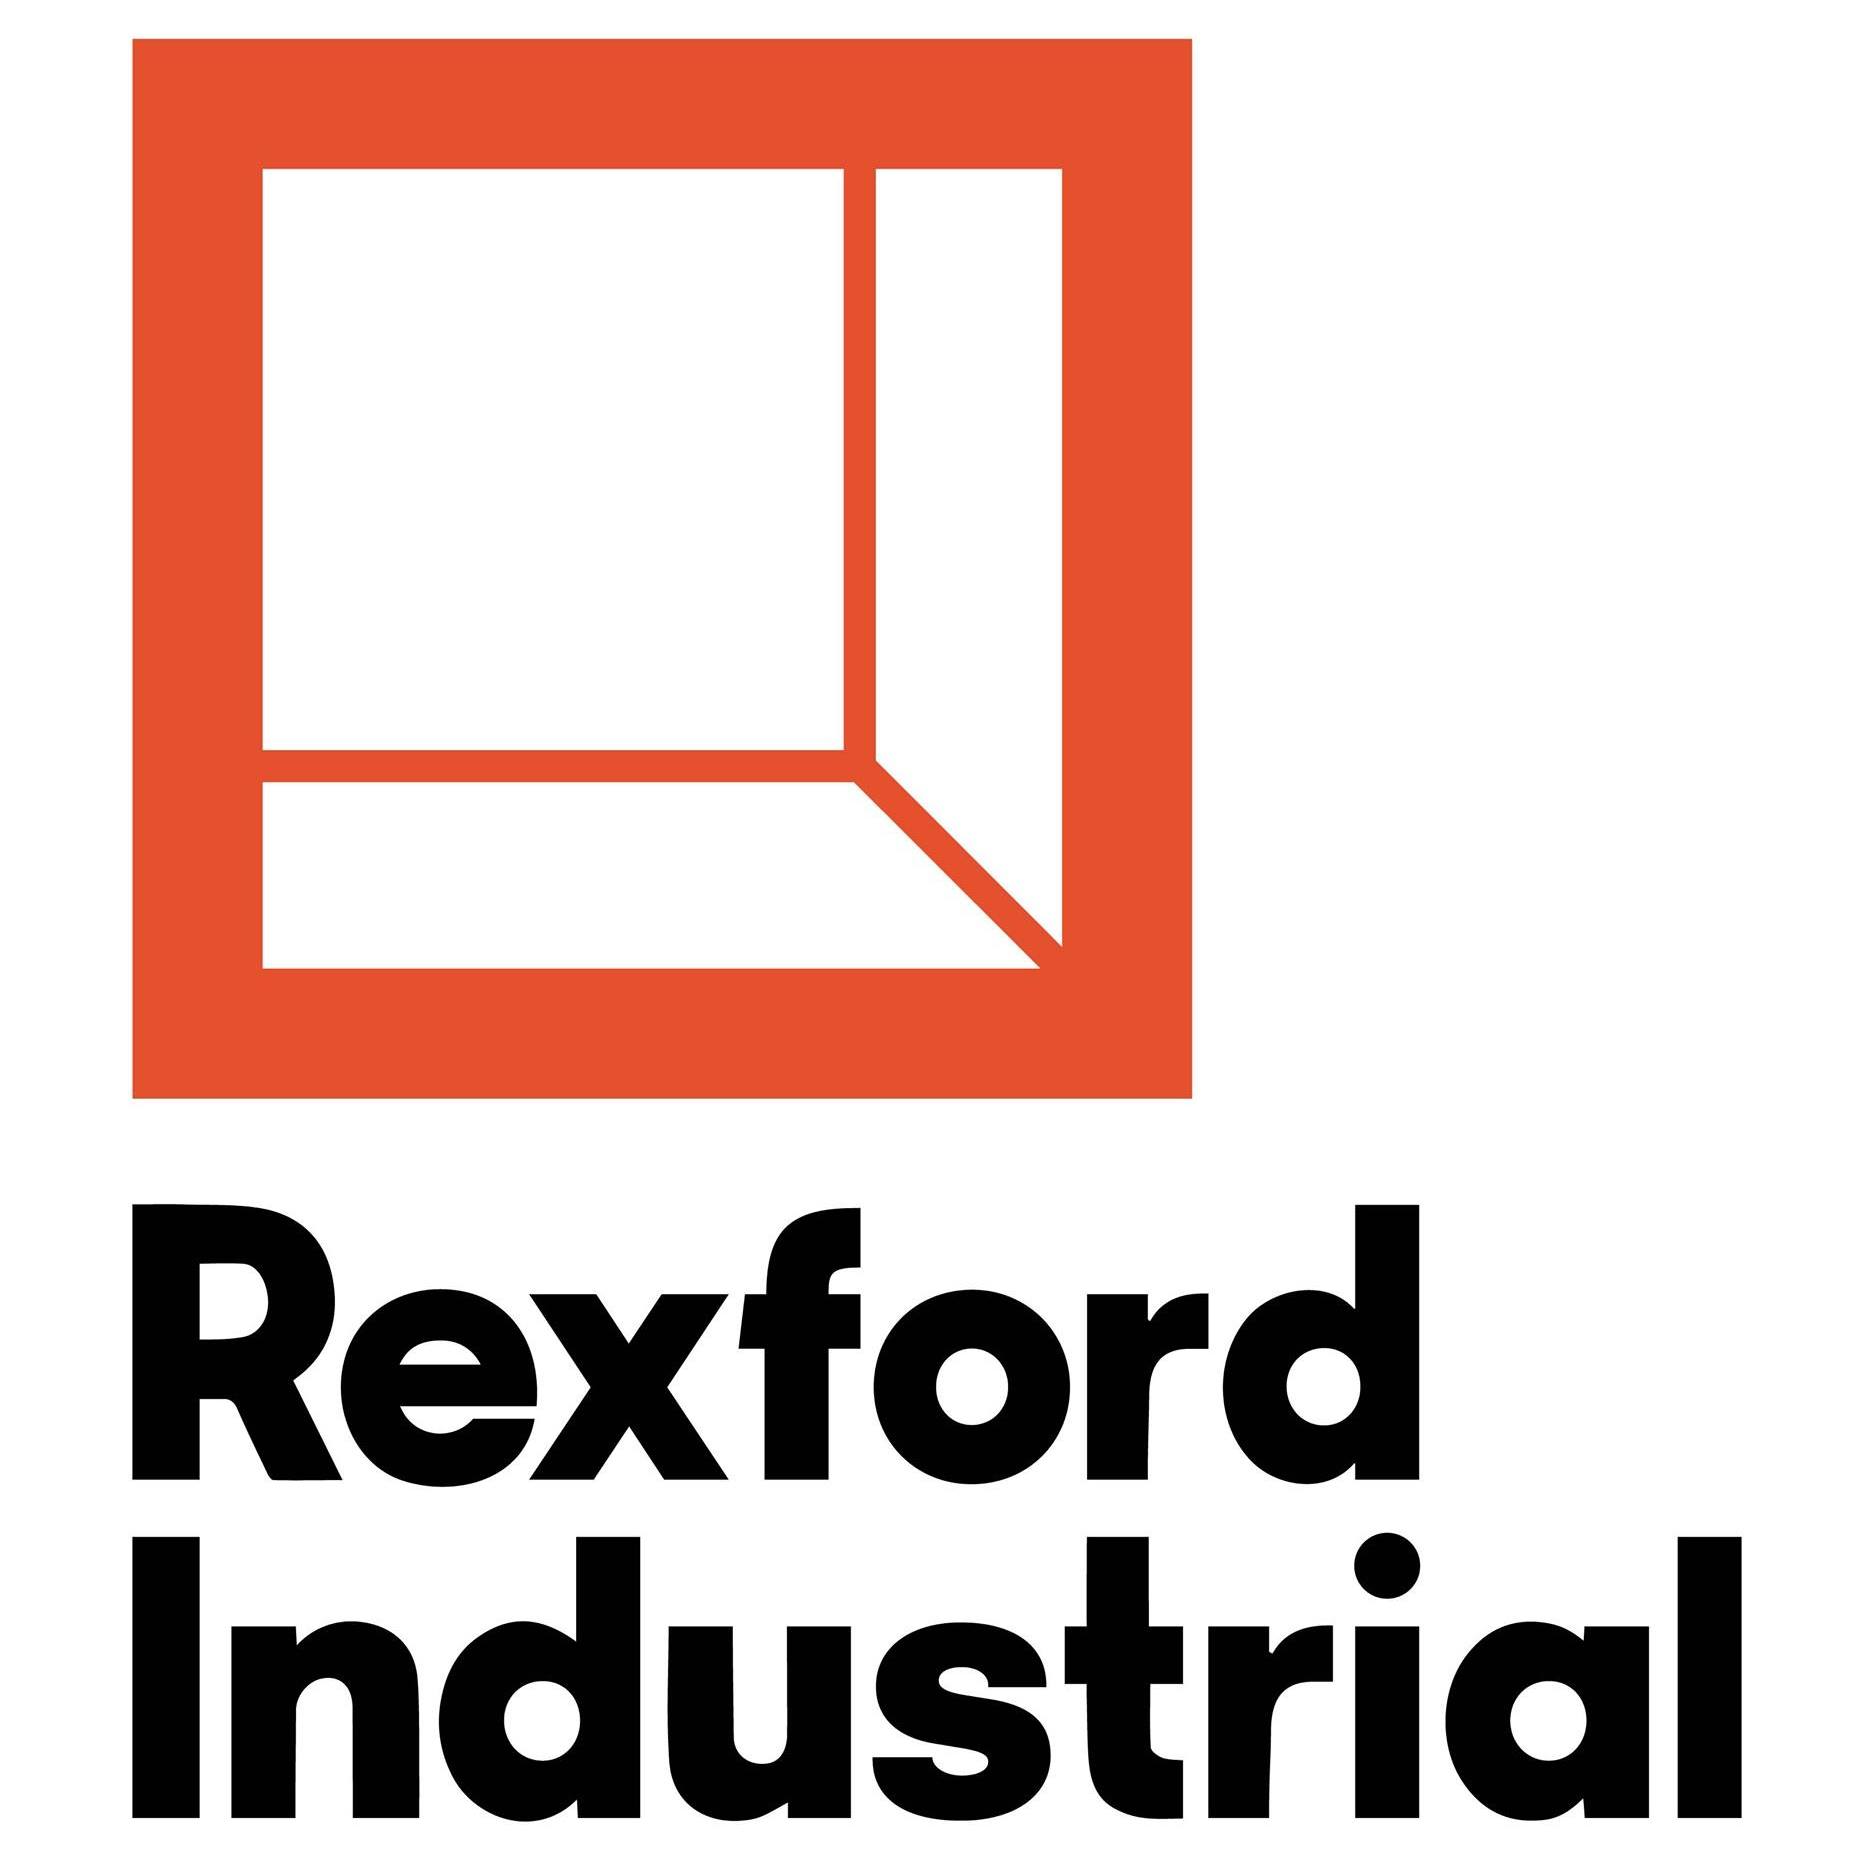 Rexford Industrial Realty